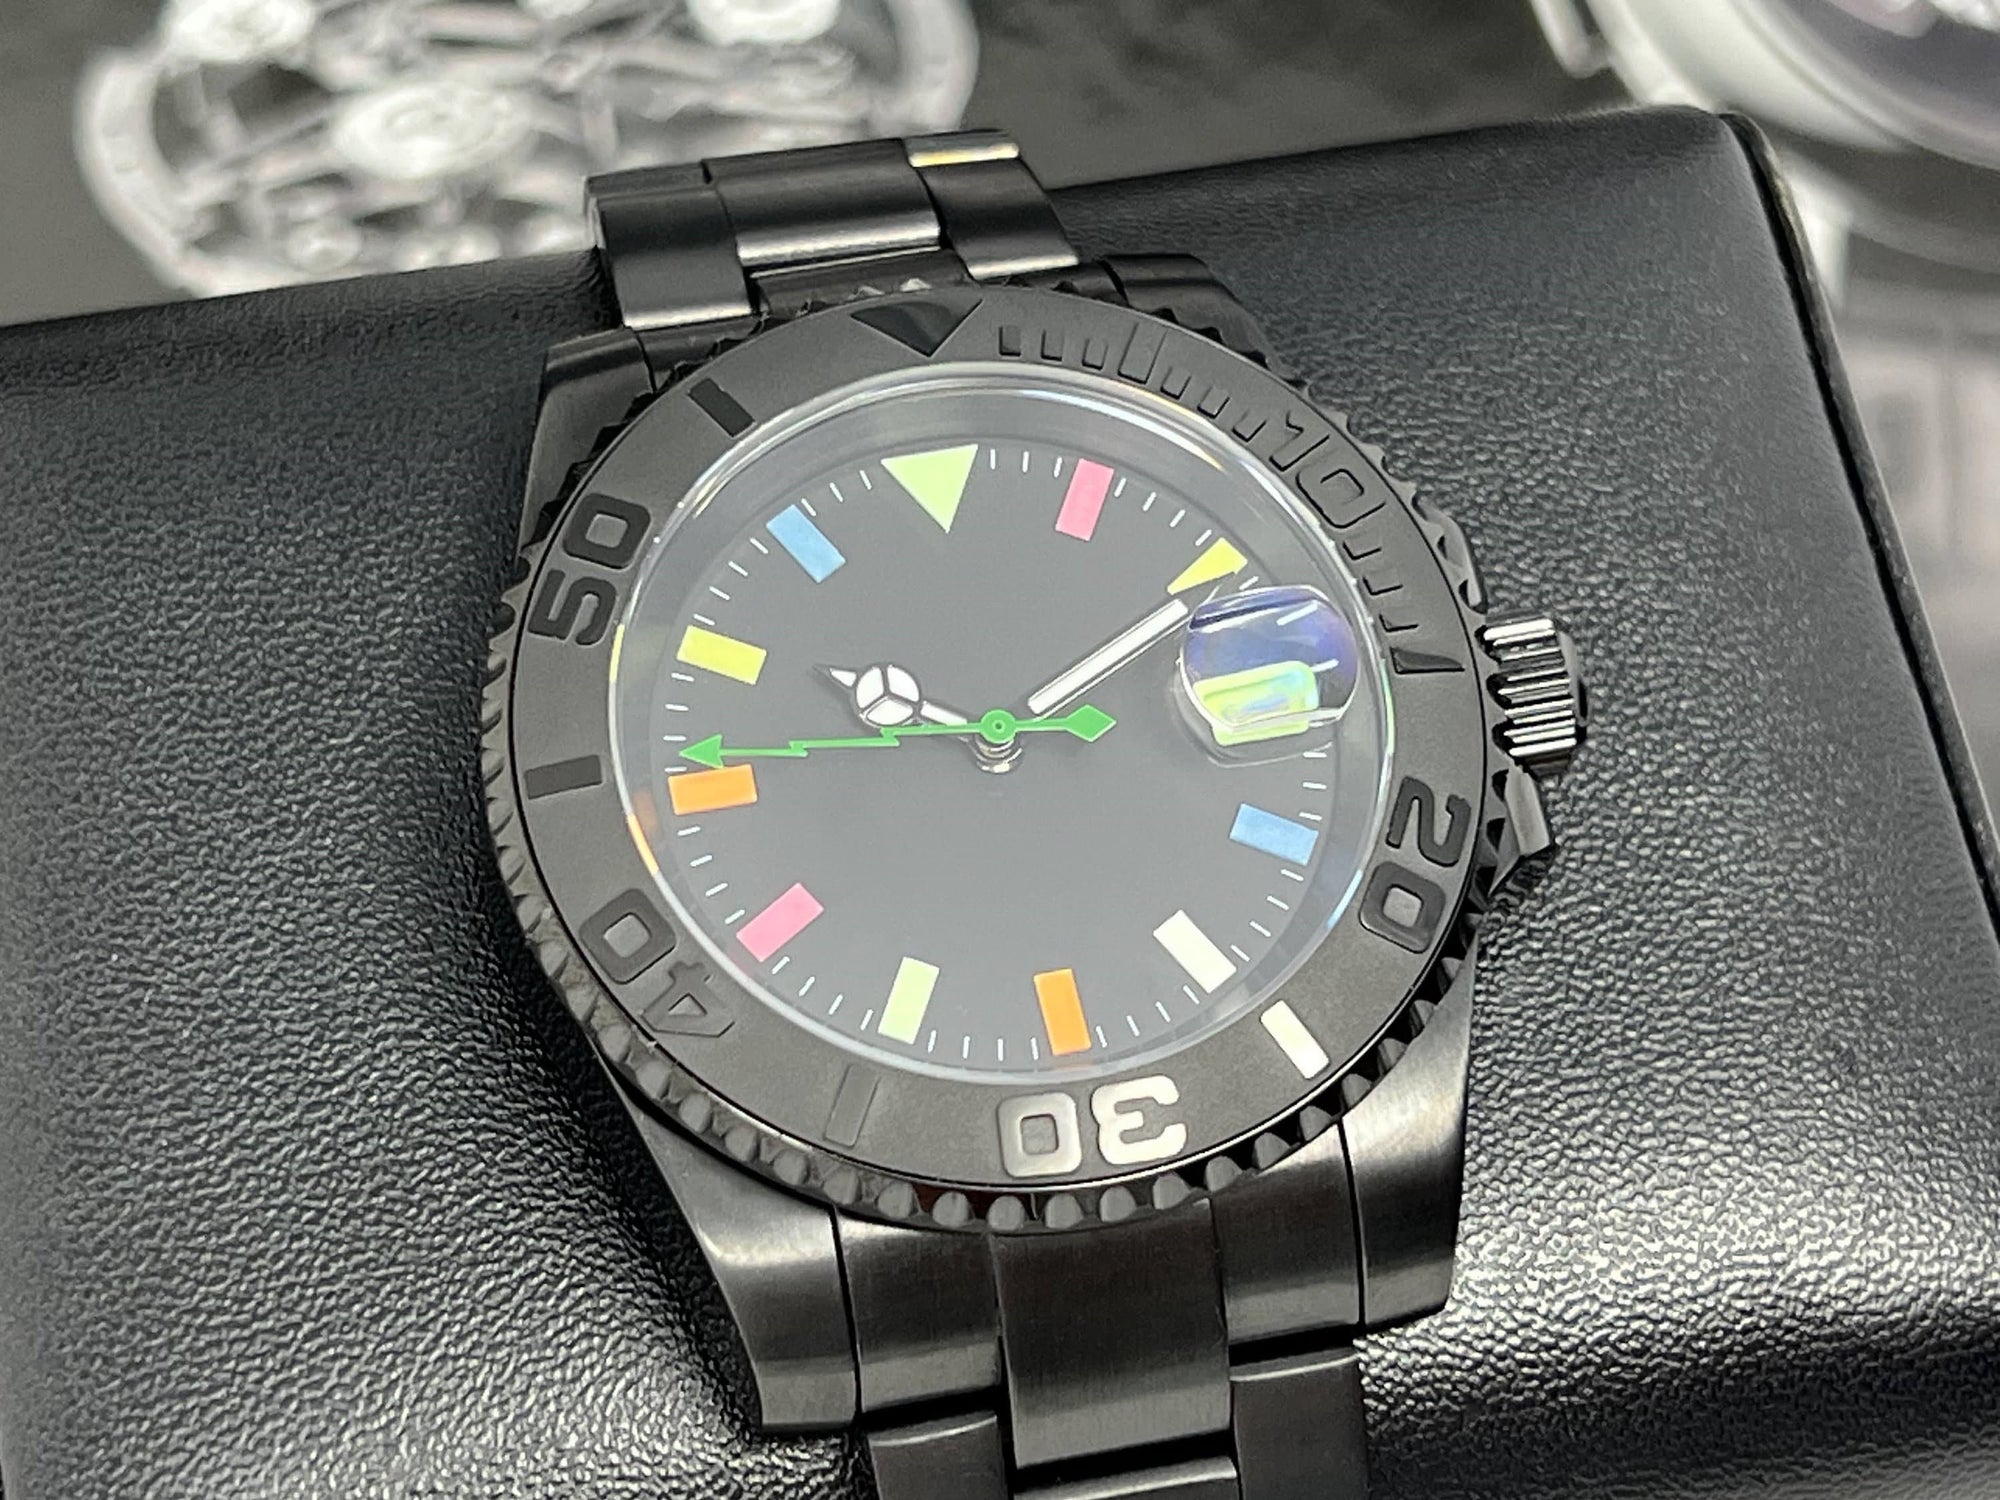 Blacked Out & Neon Glow Luxury Watch | Seiko Mod | Sapphire Crystal, Colorful Dial, Color, Watch Mod, Unique Watch, Mod Watch, Blank Dial